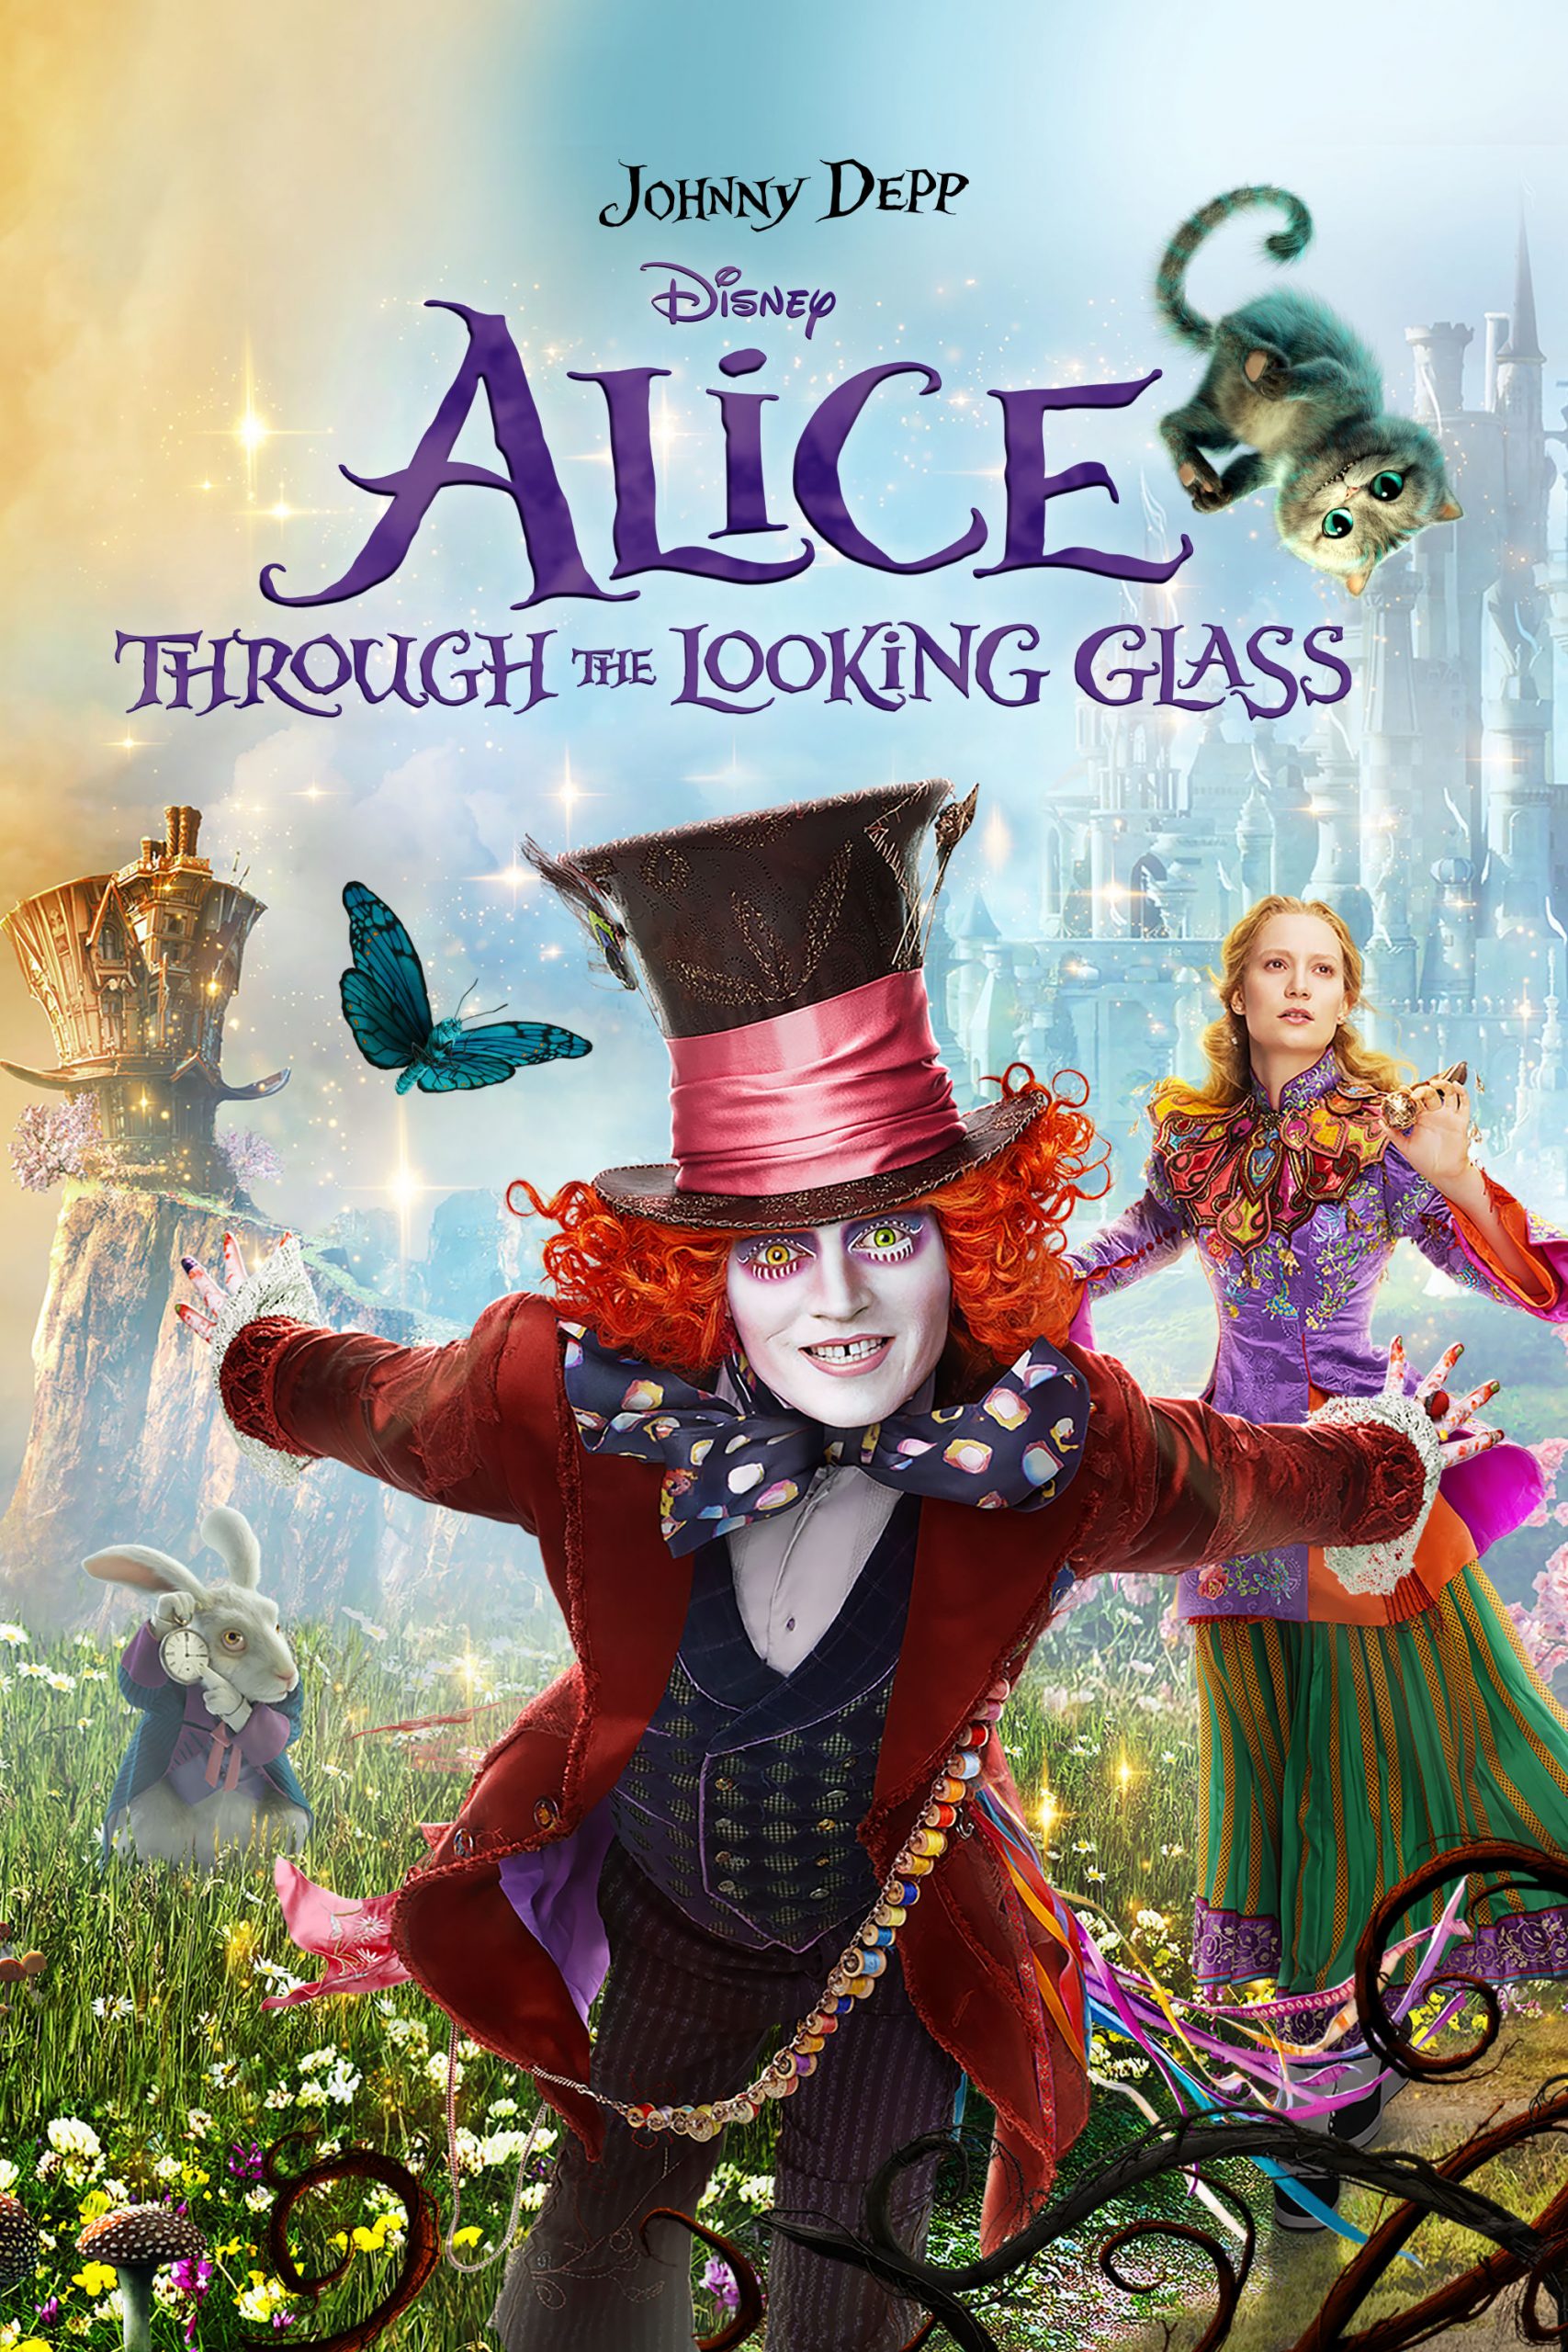 https://amovieguy.com/wp-content/uploads/2020/11/disneys_alice_through_the_looking_glass_-_itunes_movie_poster-scaled.jpg